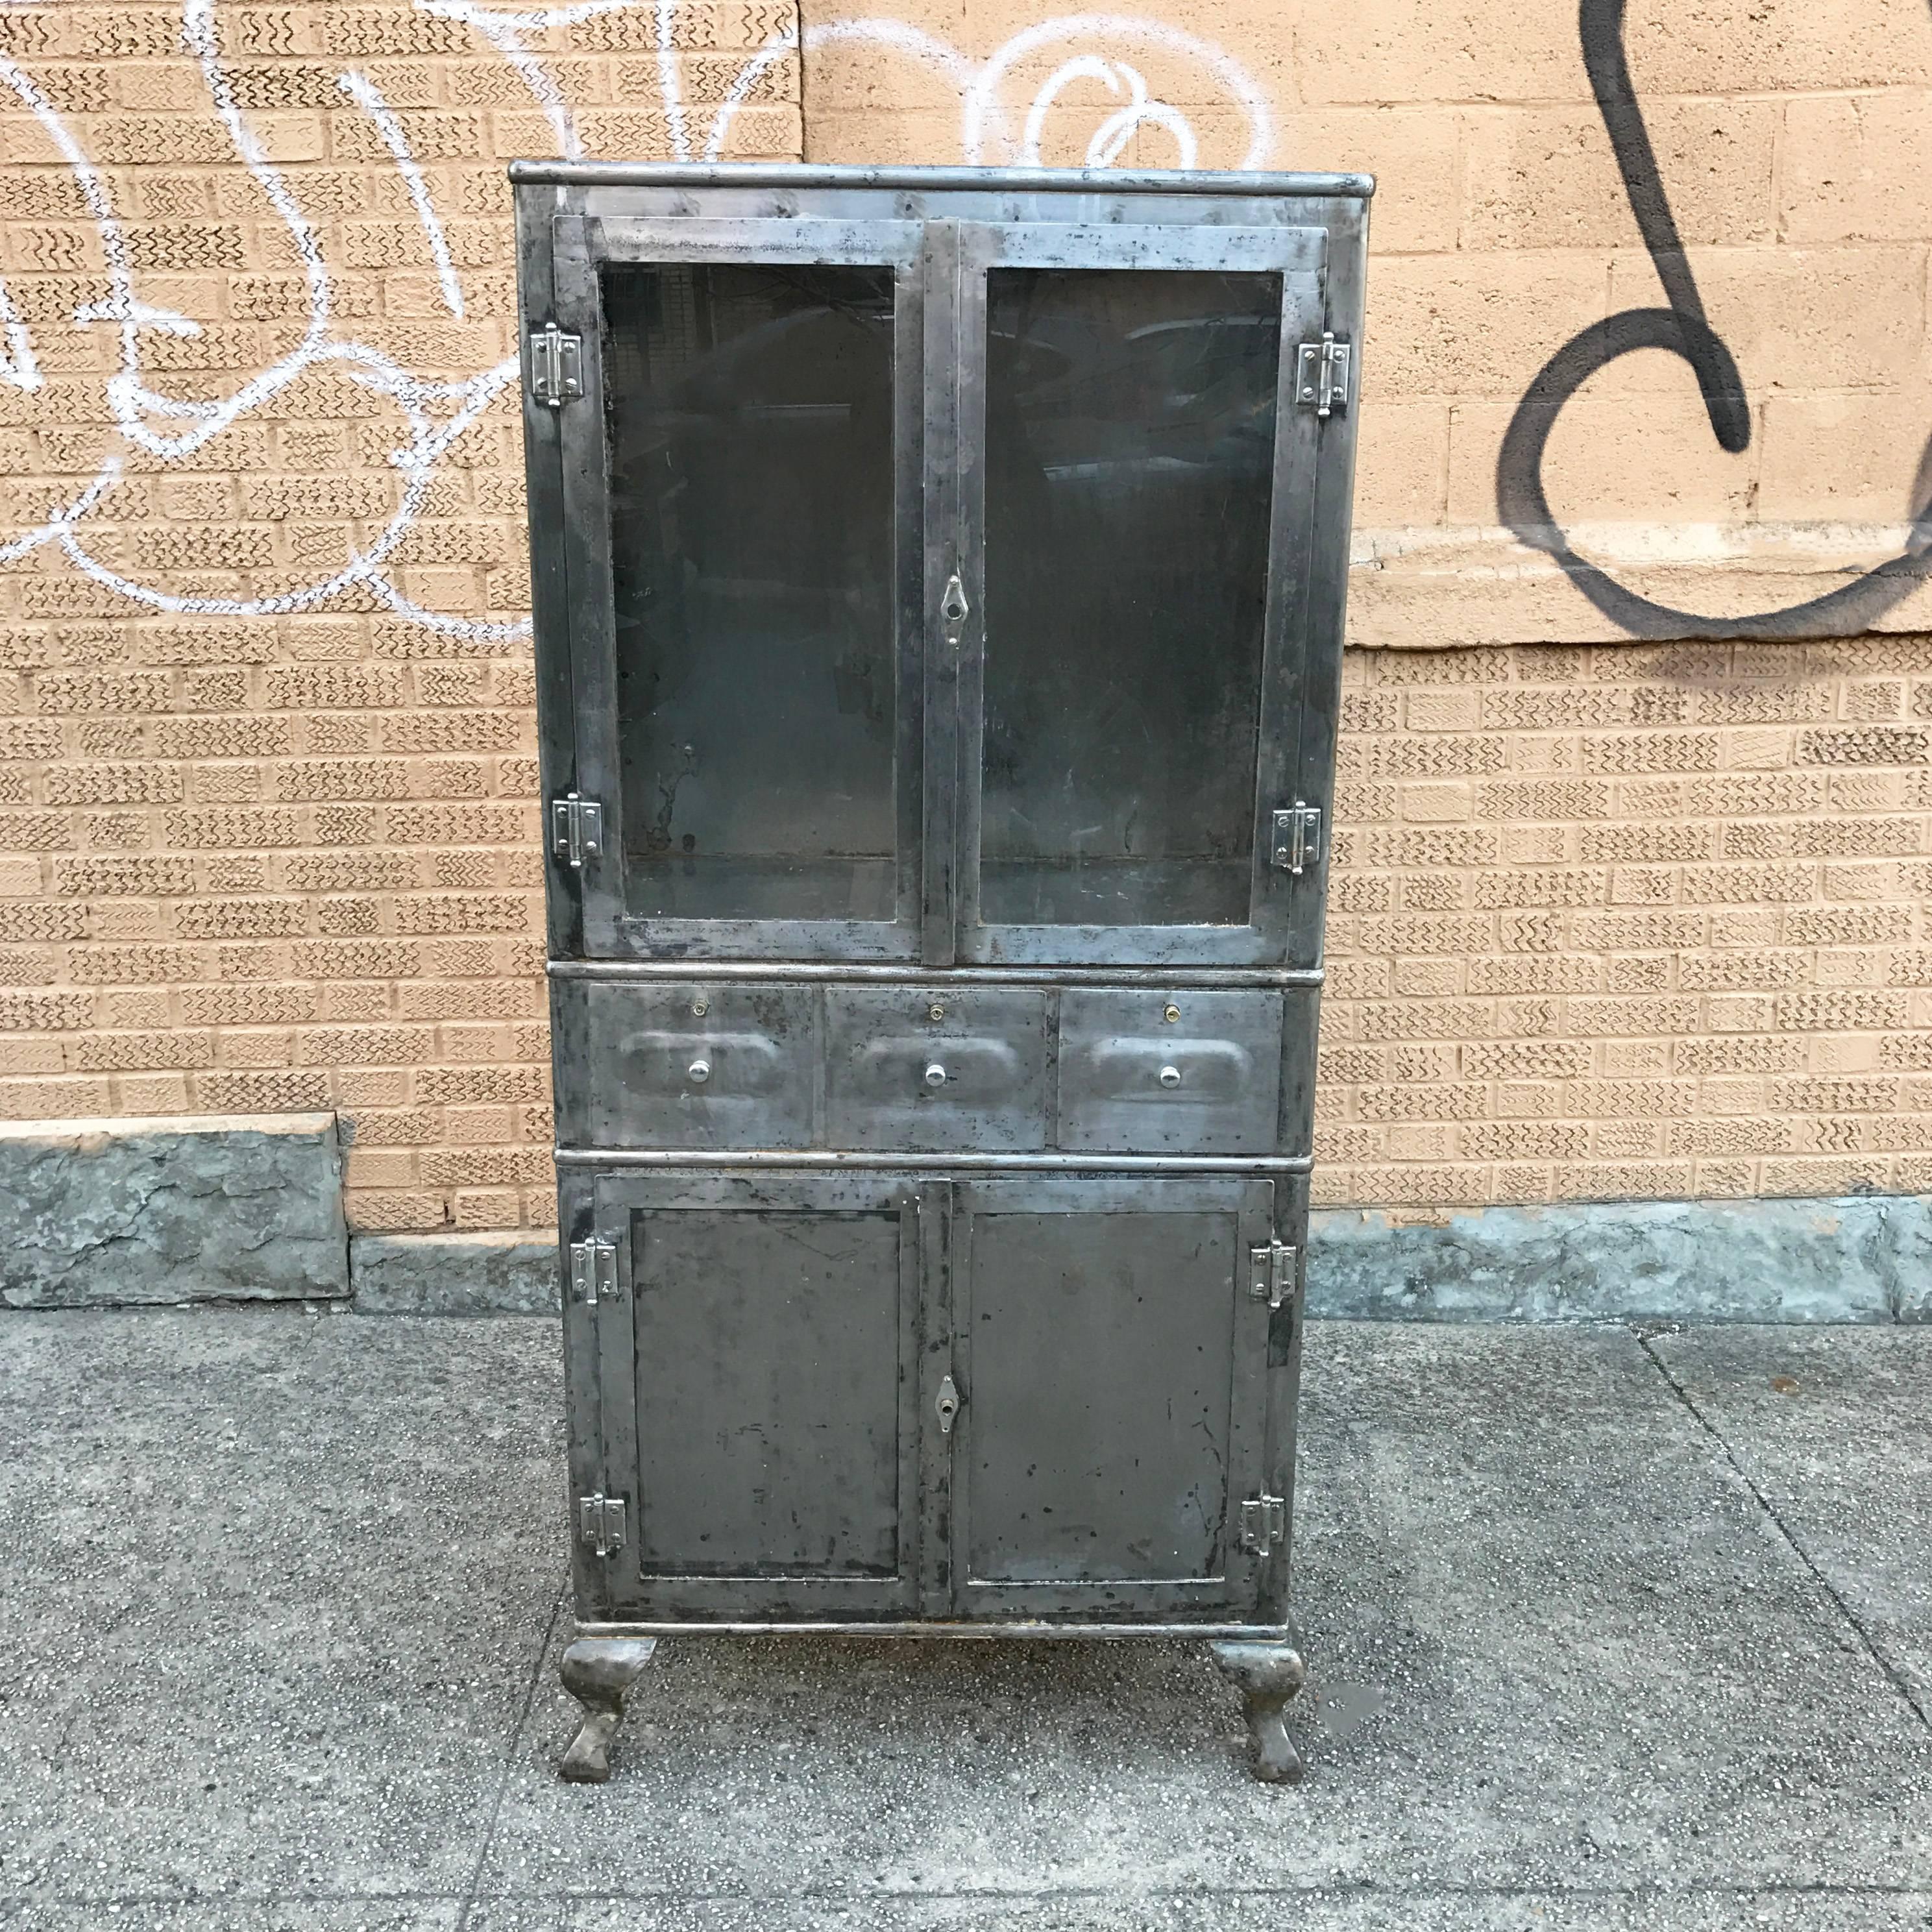 1920s, Industrial, brushed steel, double door, apothecary, medicine cabinet has cabinet and drawer storage below and display on top with two glass shelves.

